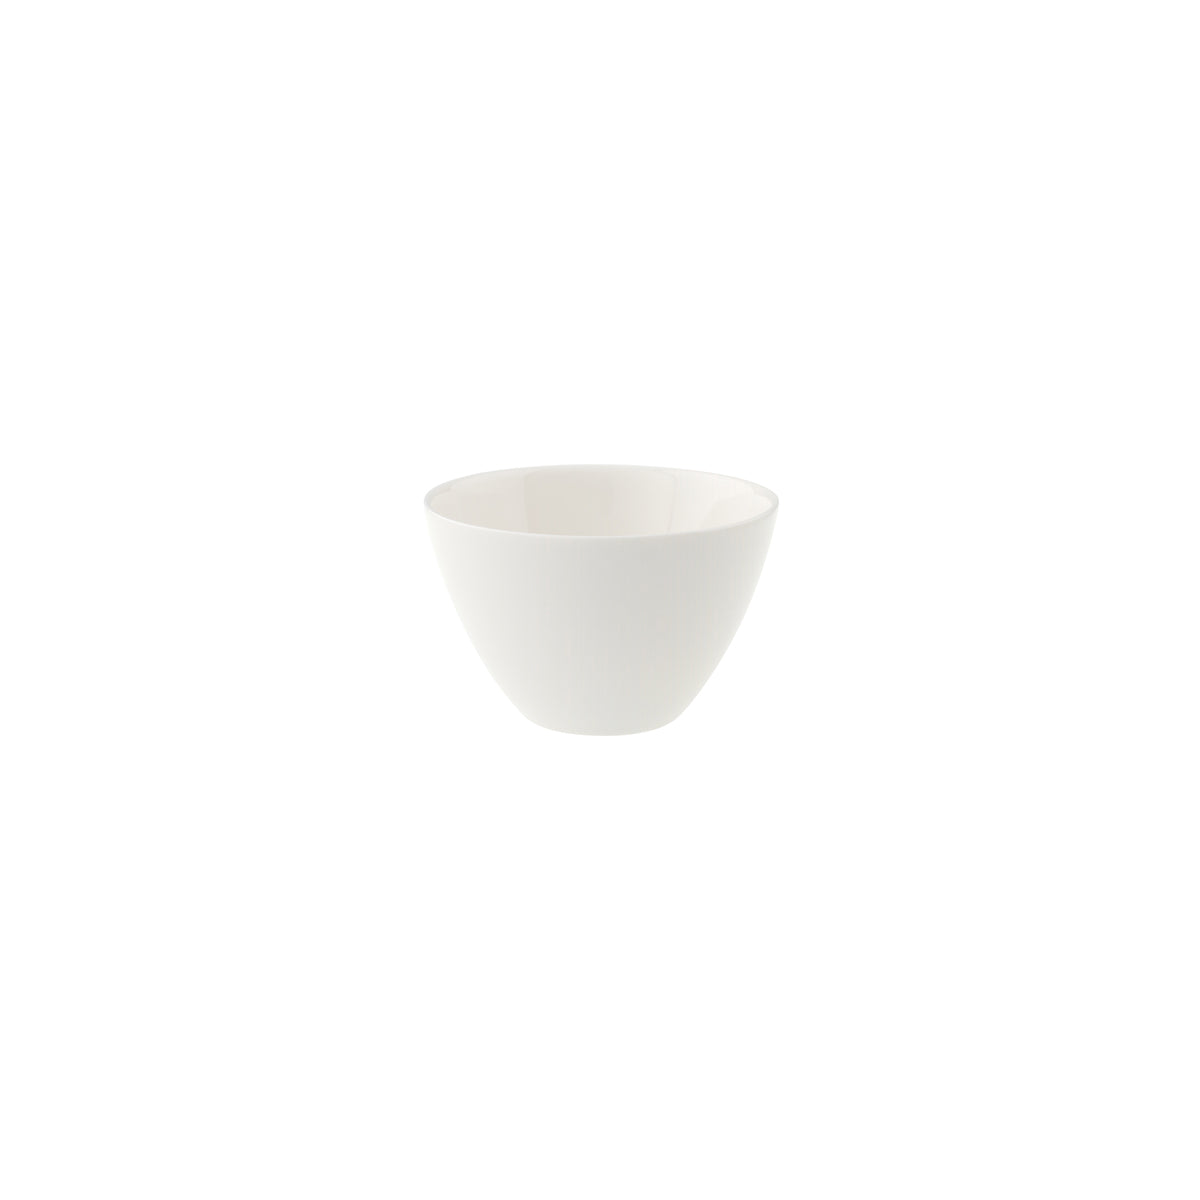 VB16-3275-3811 Villeroy And Boch Villeroy And Boch Marchesi White Gourmet Bowl 100mm / 270ml Tomkin Australia Hospitality Supplies